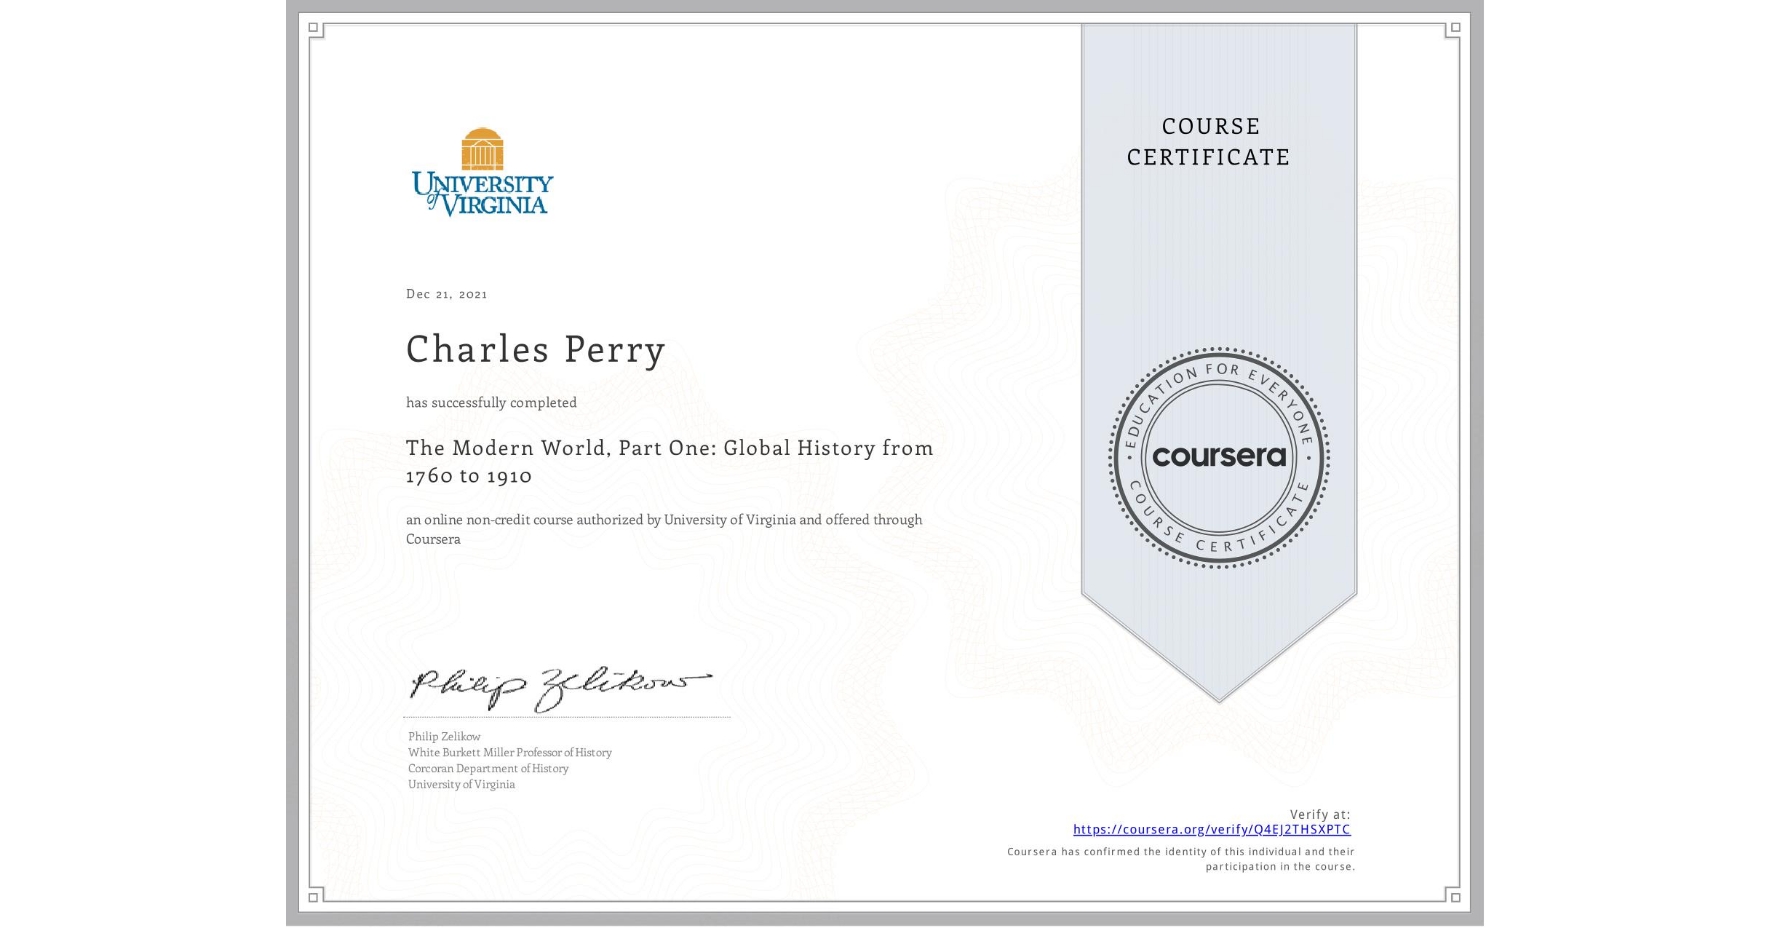 View certificate for Charles Perry, The Modern World, Part One: Global History from 1760 to 1910, an online non-credit course authorized by University of Virginia and offered through Coursera